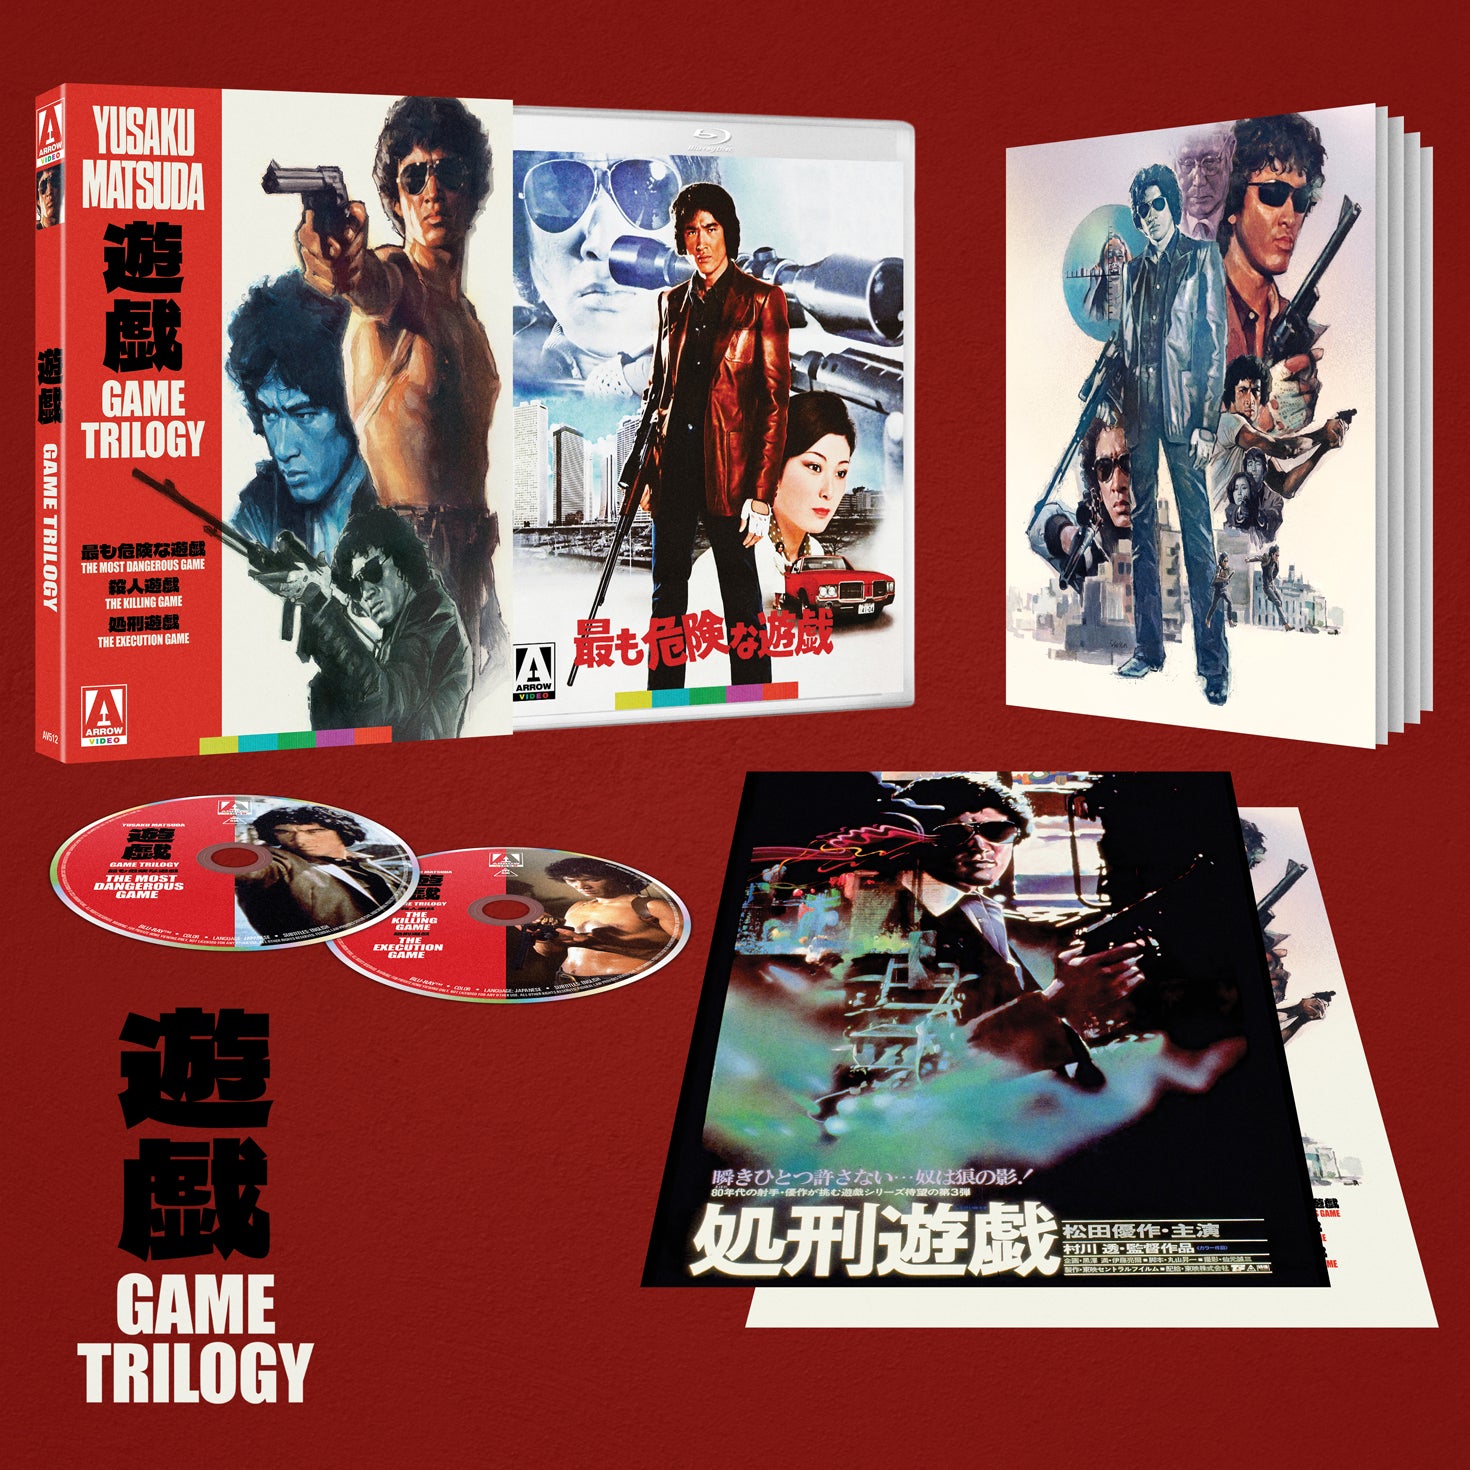 THE GAME TRILOGY (LIMITED EDITION) BLU-RAY